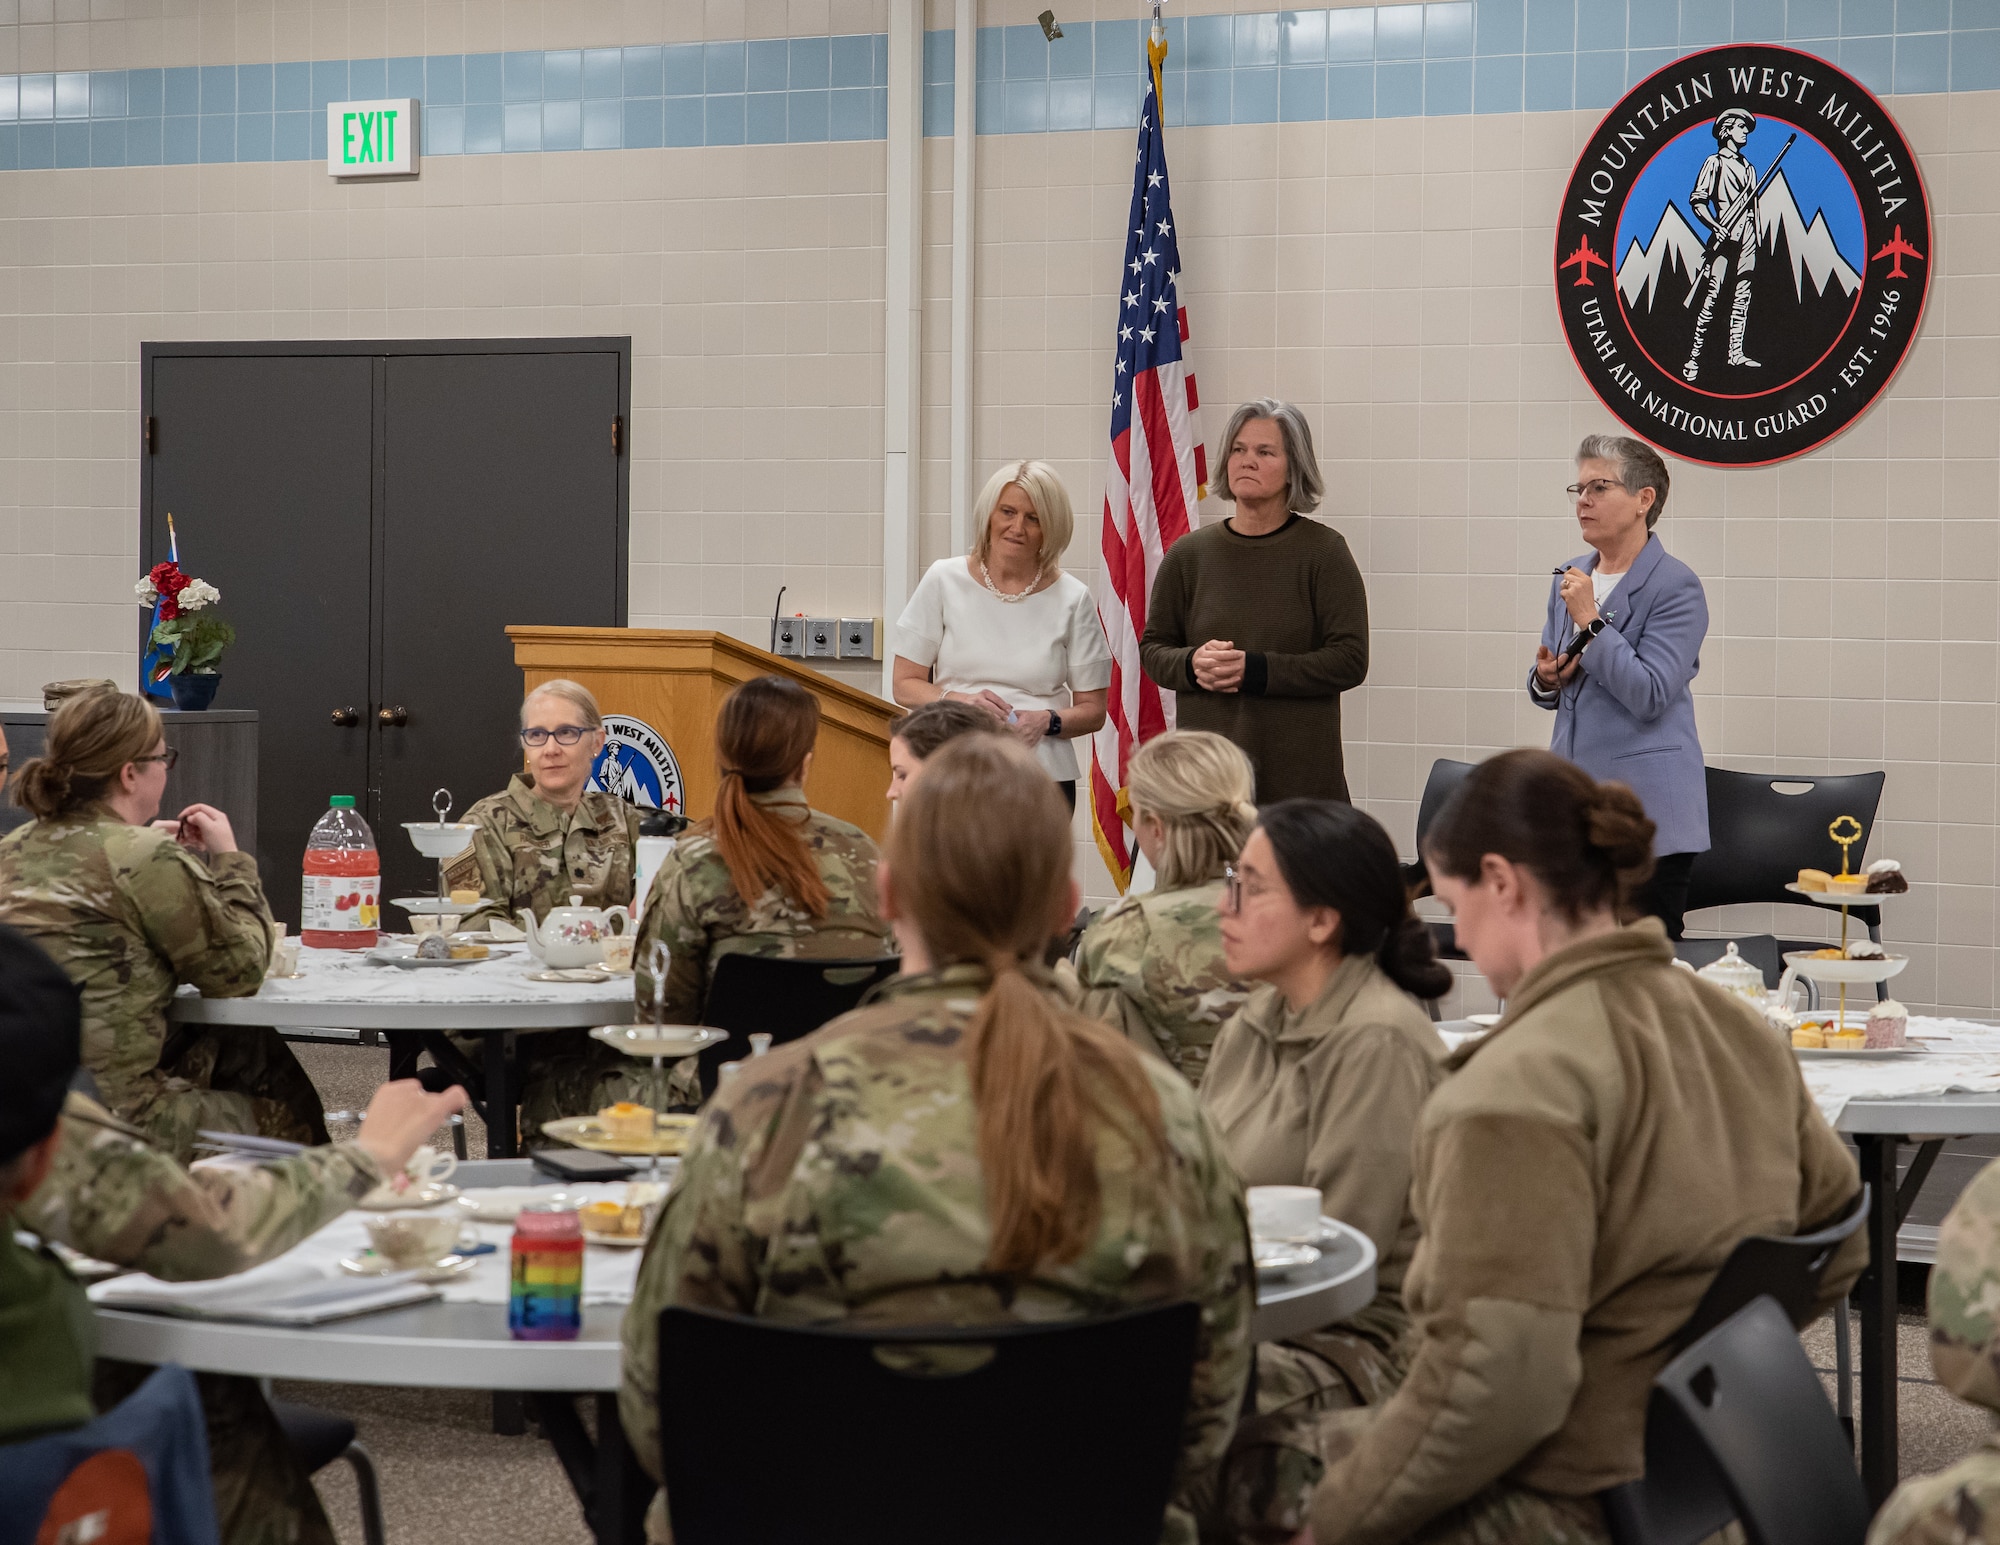 Three retired military women, speak to a group of currently serving military women.